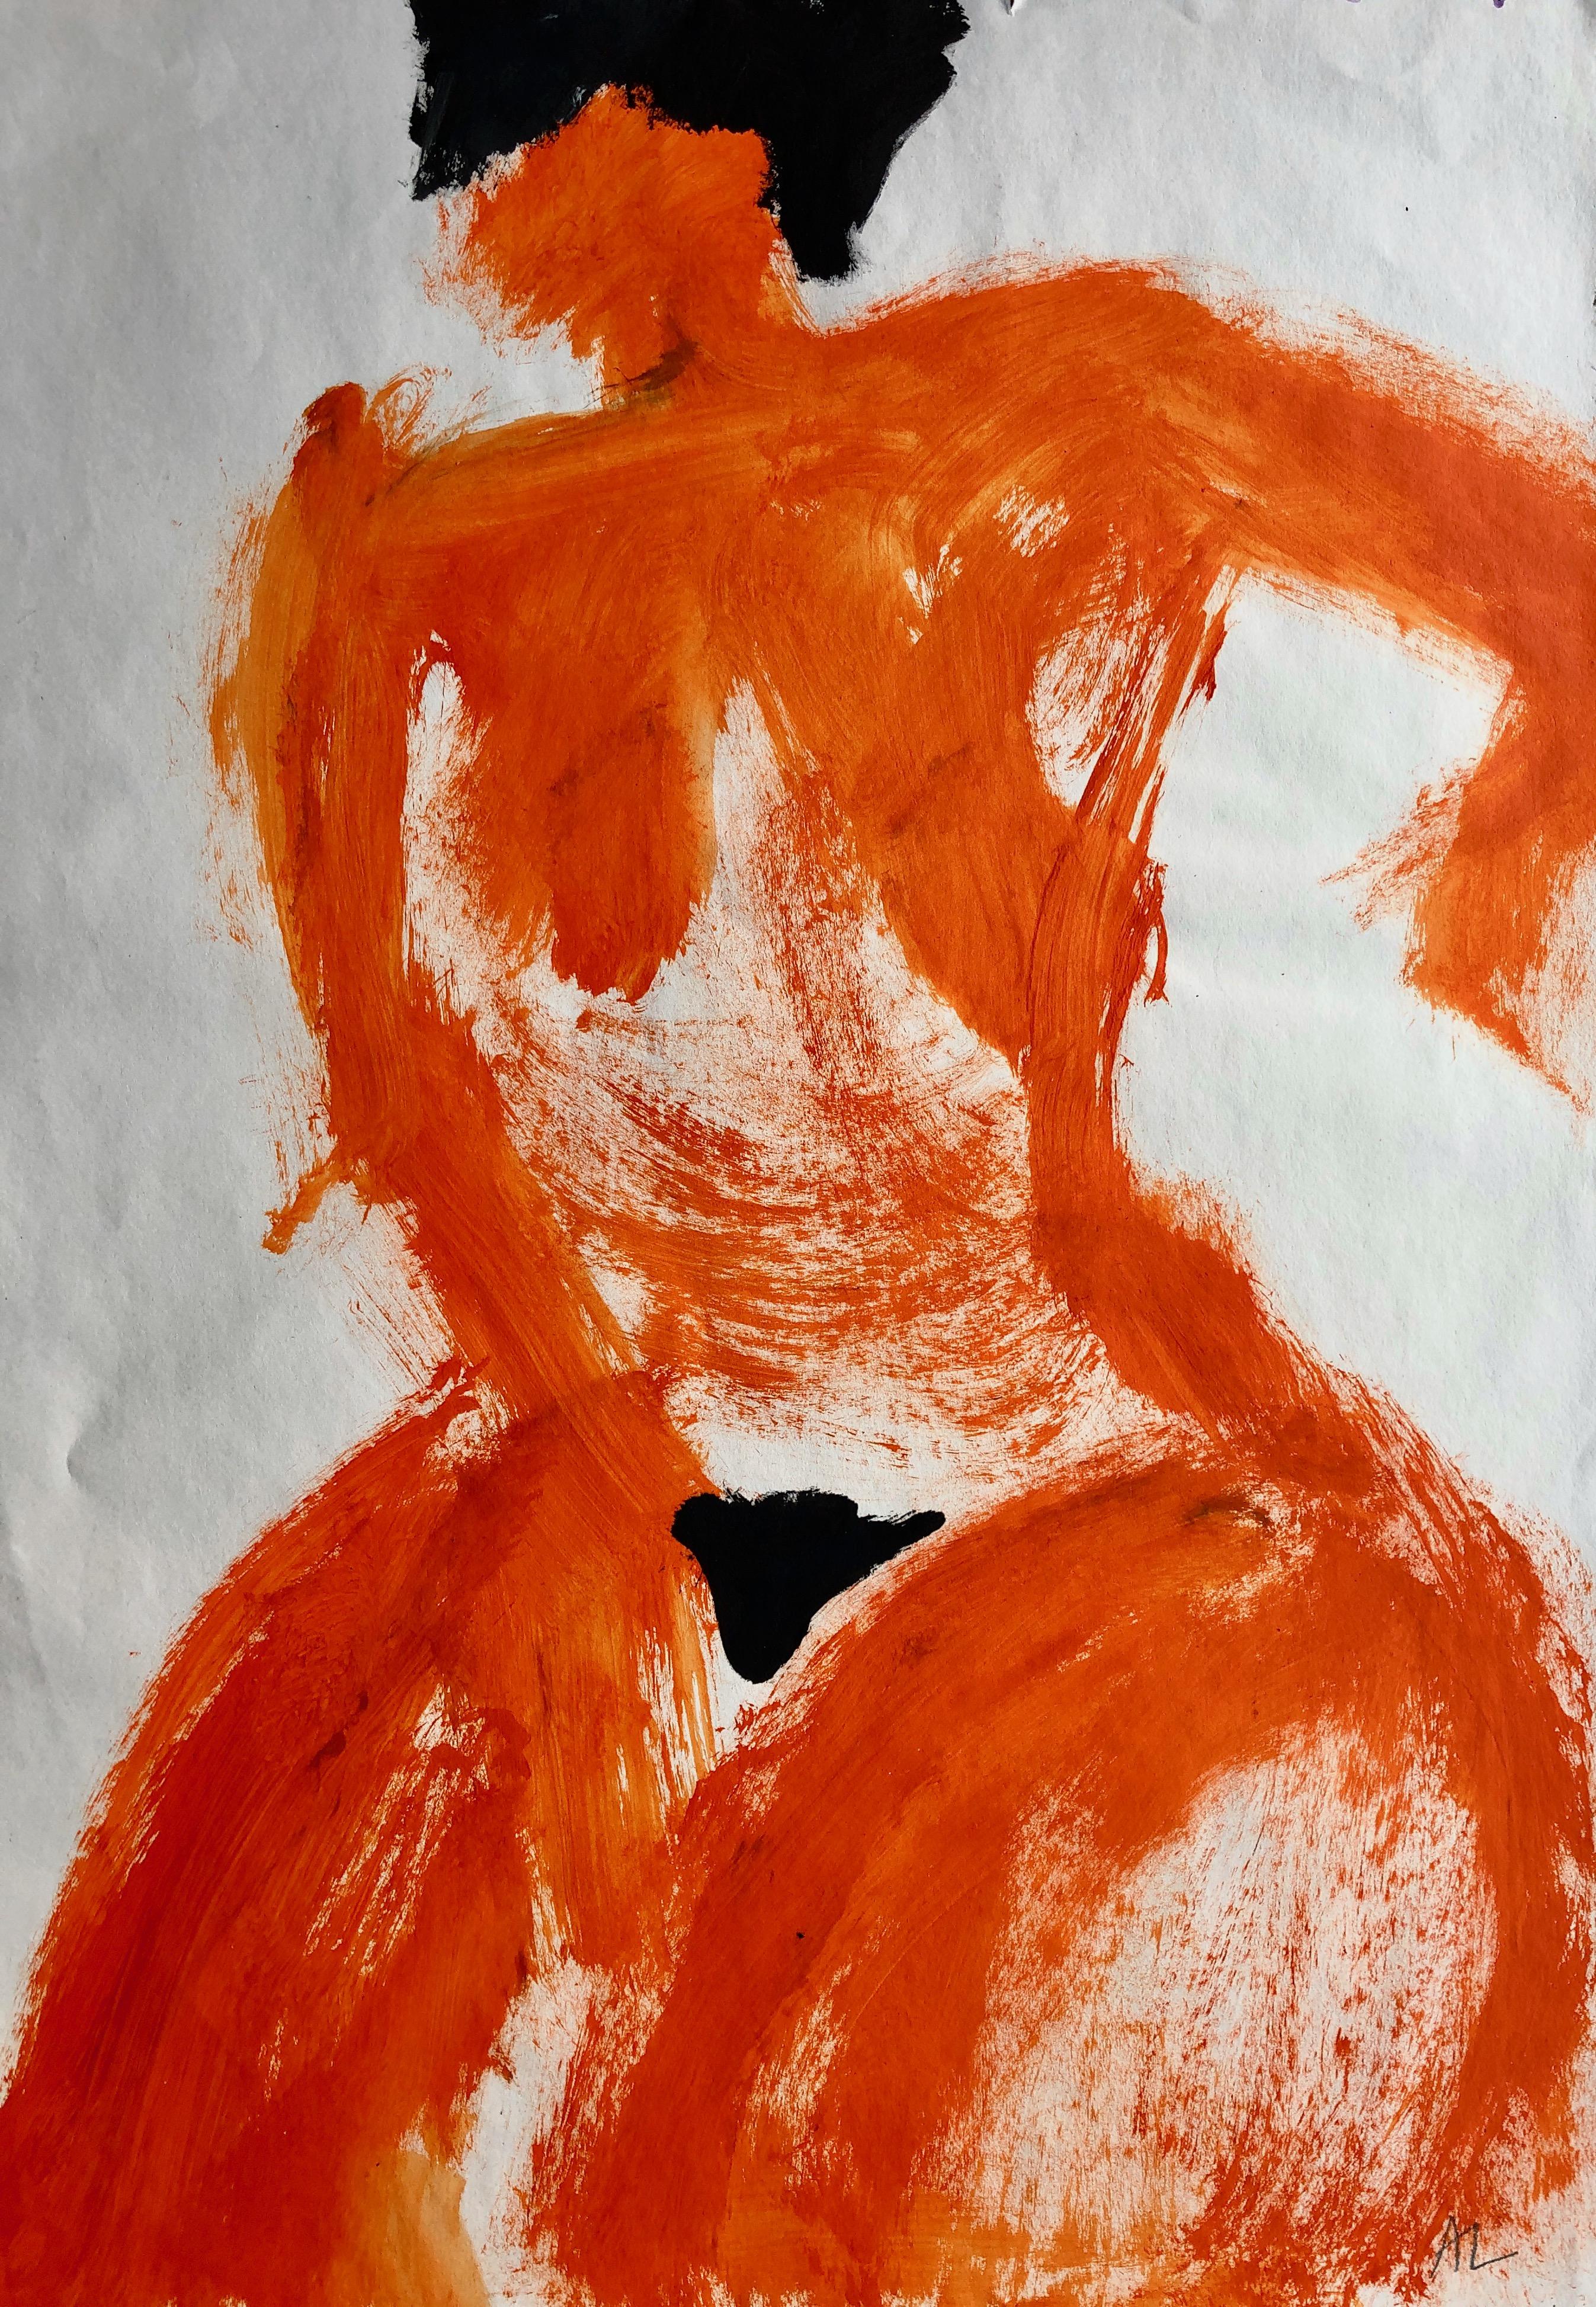 Angela Lyle Nude - Orange Woman. Contemporary Mixed Media on paper